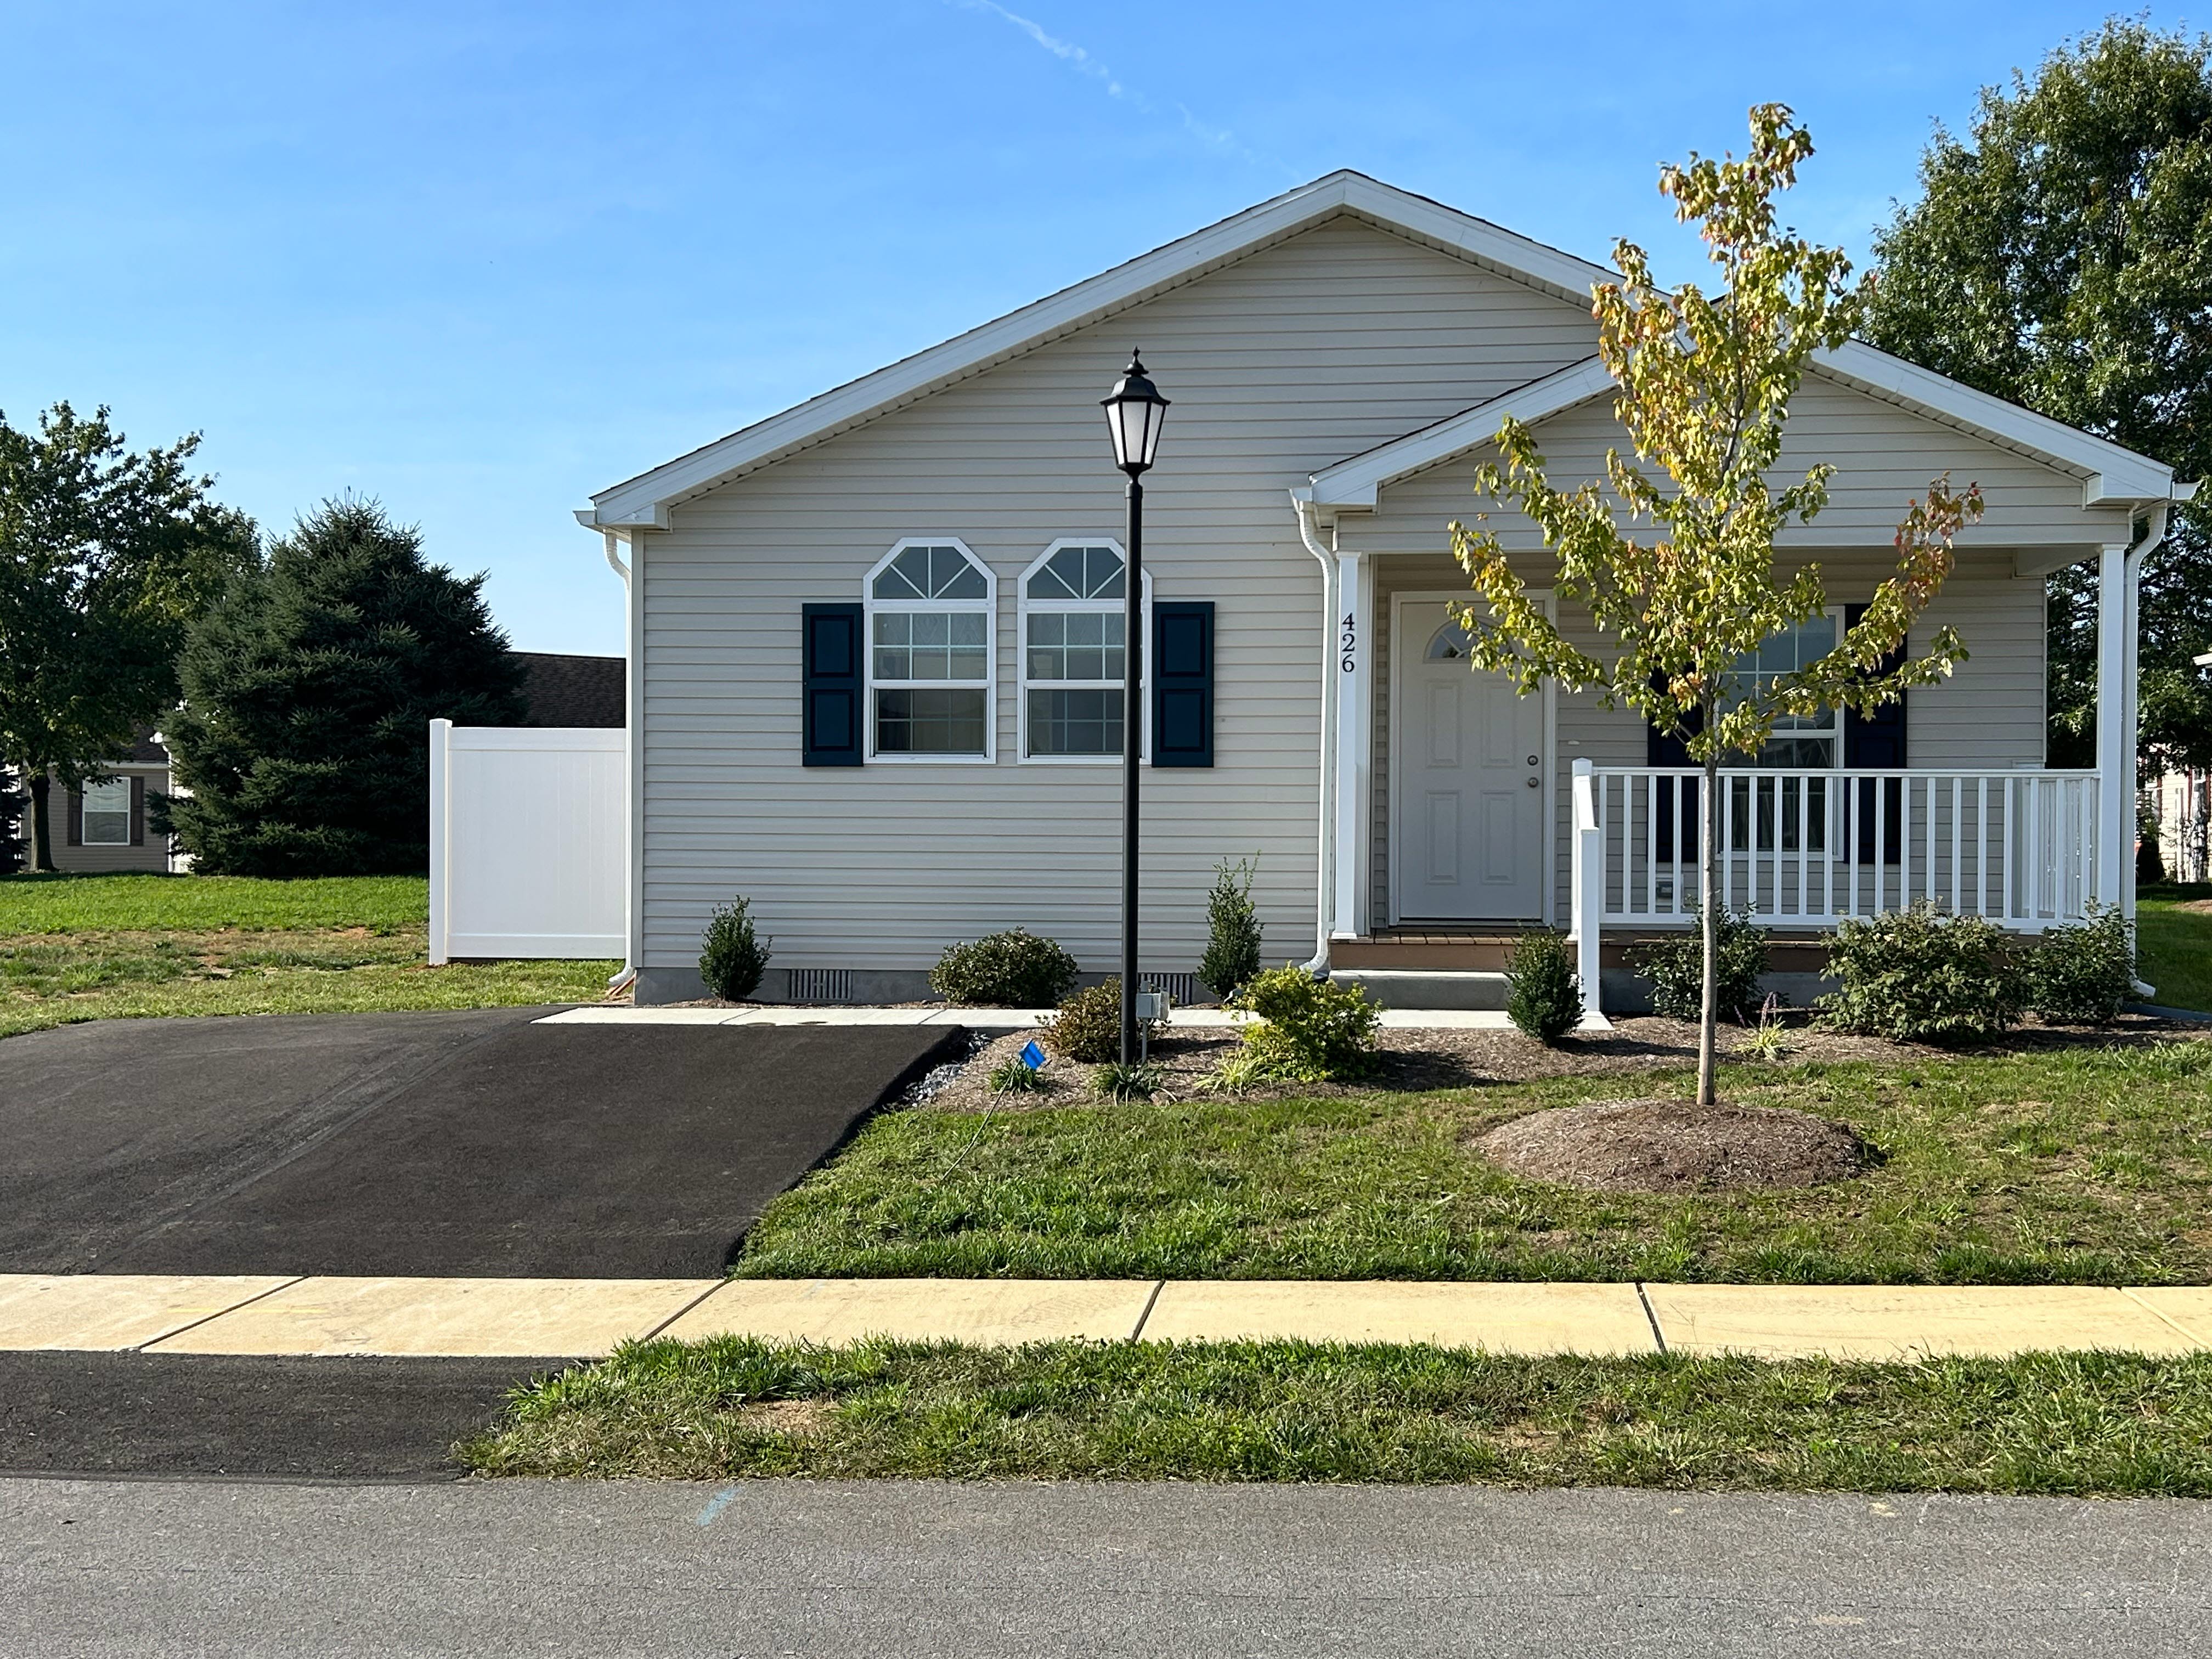 SOLD   2023 LITITZ MODEL 3BR/2BTH WITH FRONT PORCH - $224,964